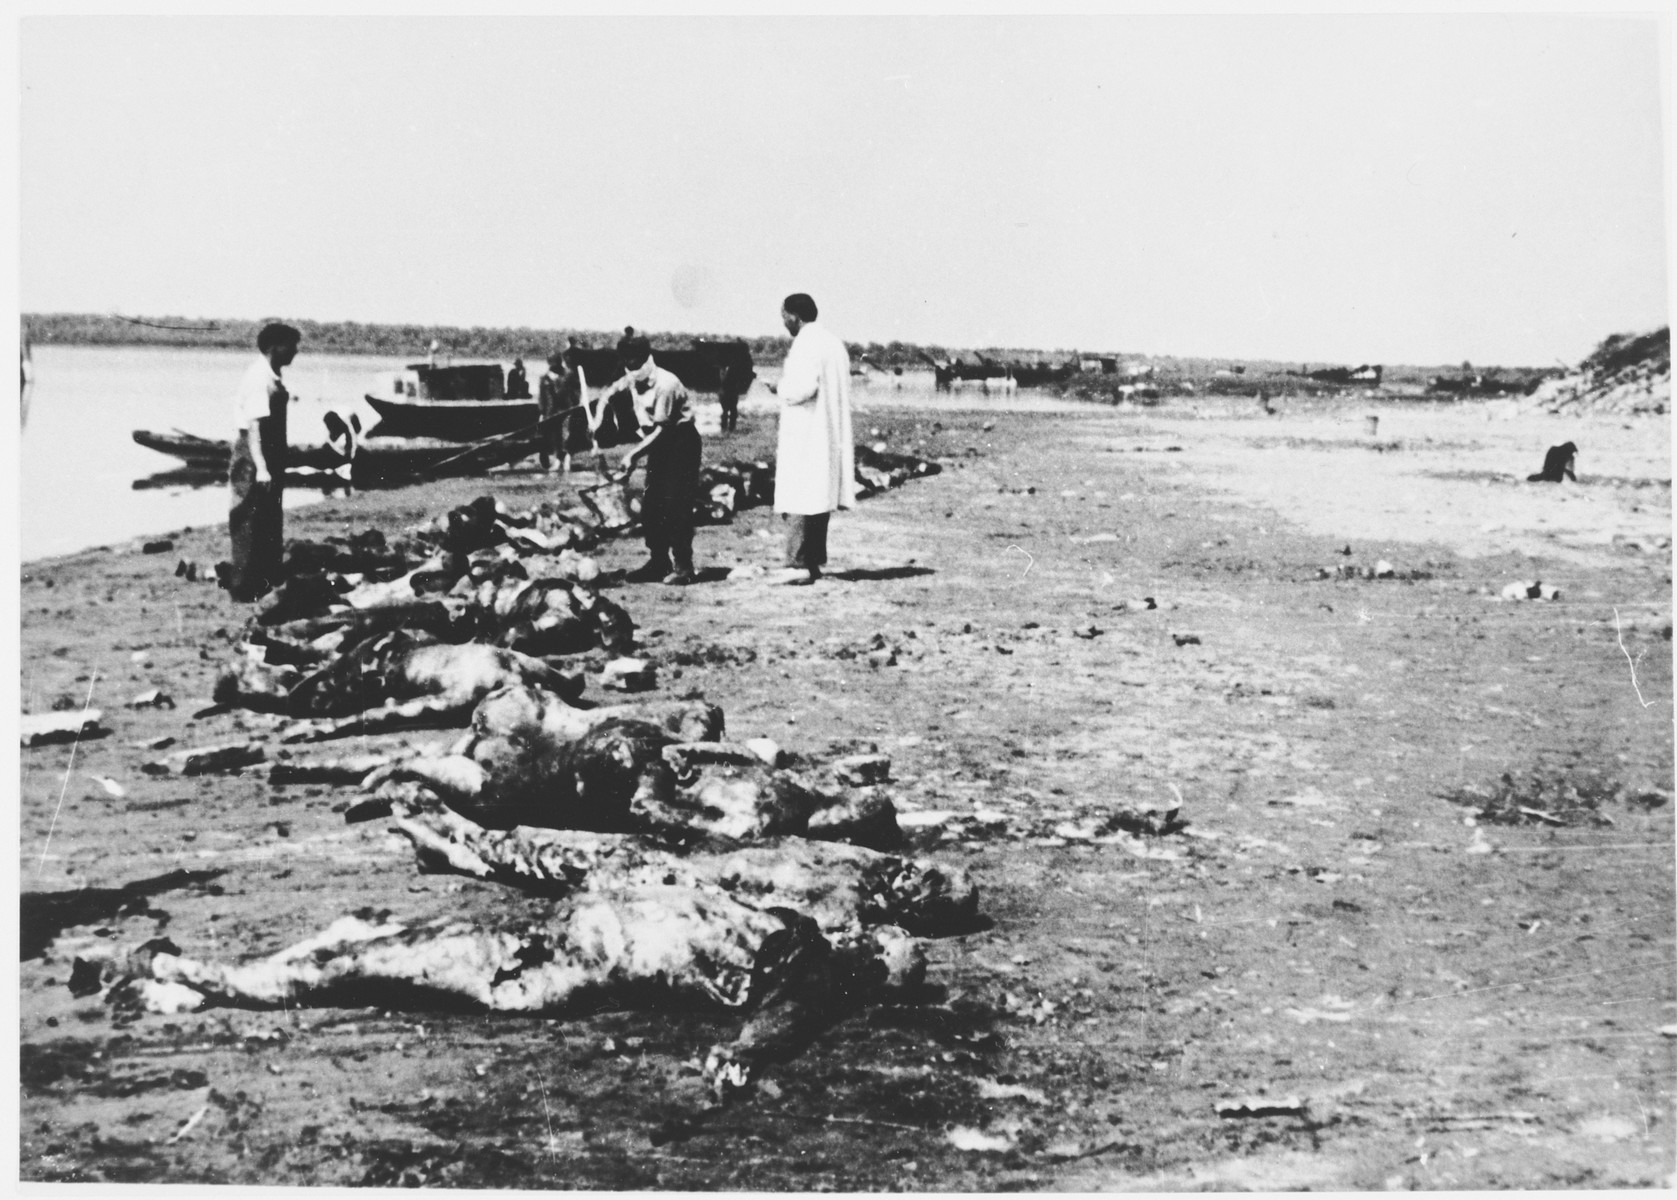 Dr. Ante Preru, a forensic specialist, oversees the retrieval of the bodies of concentration camp victims from the Sava River [probably near the Jasenovac concentration camp].